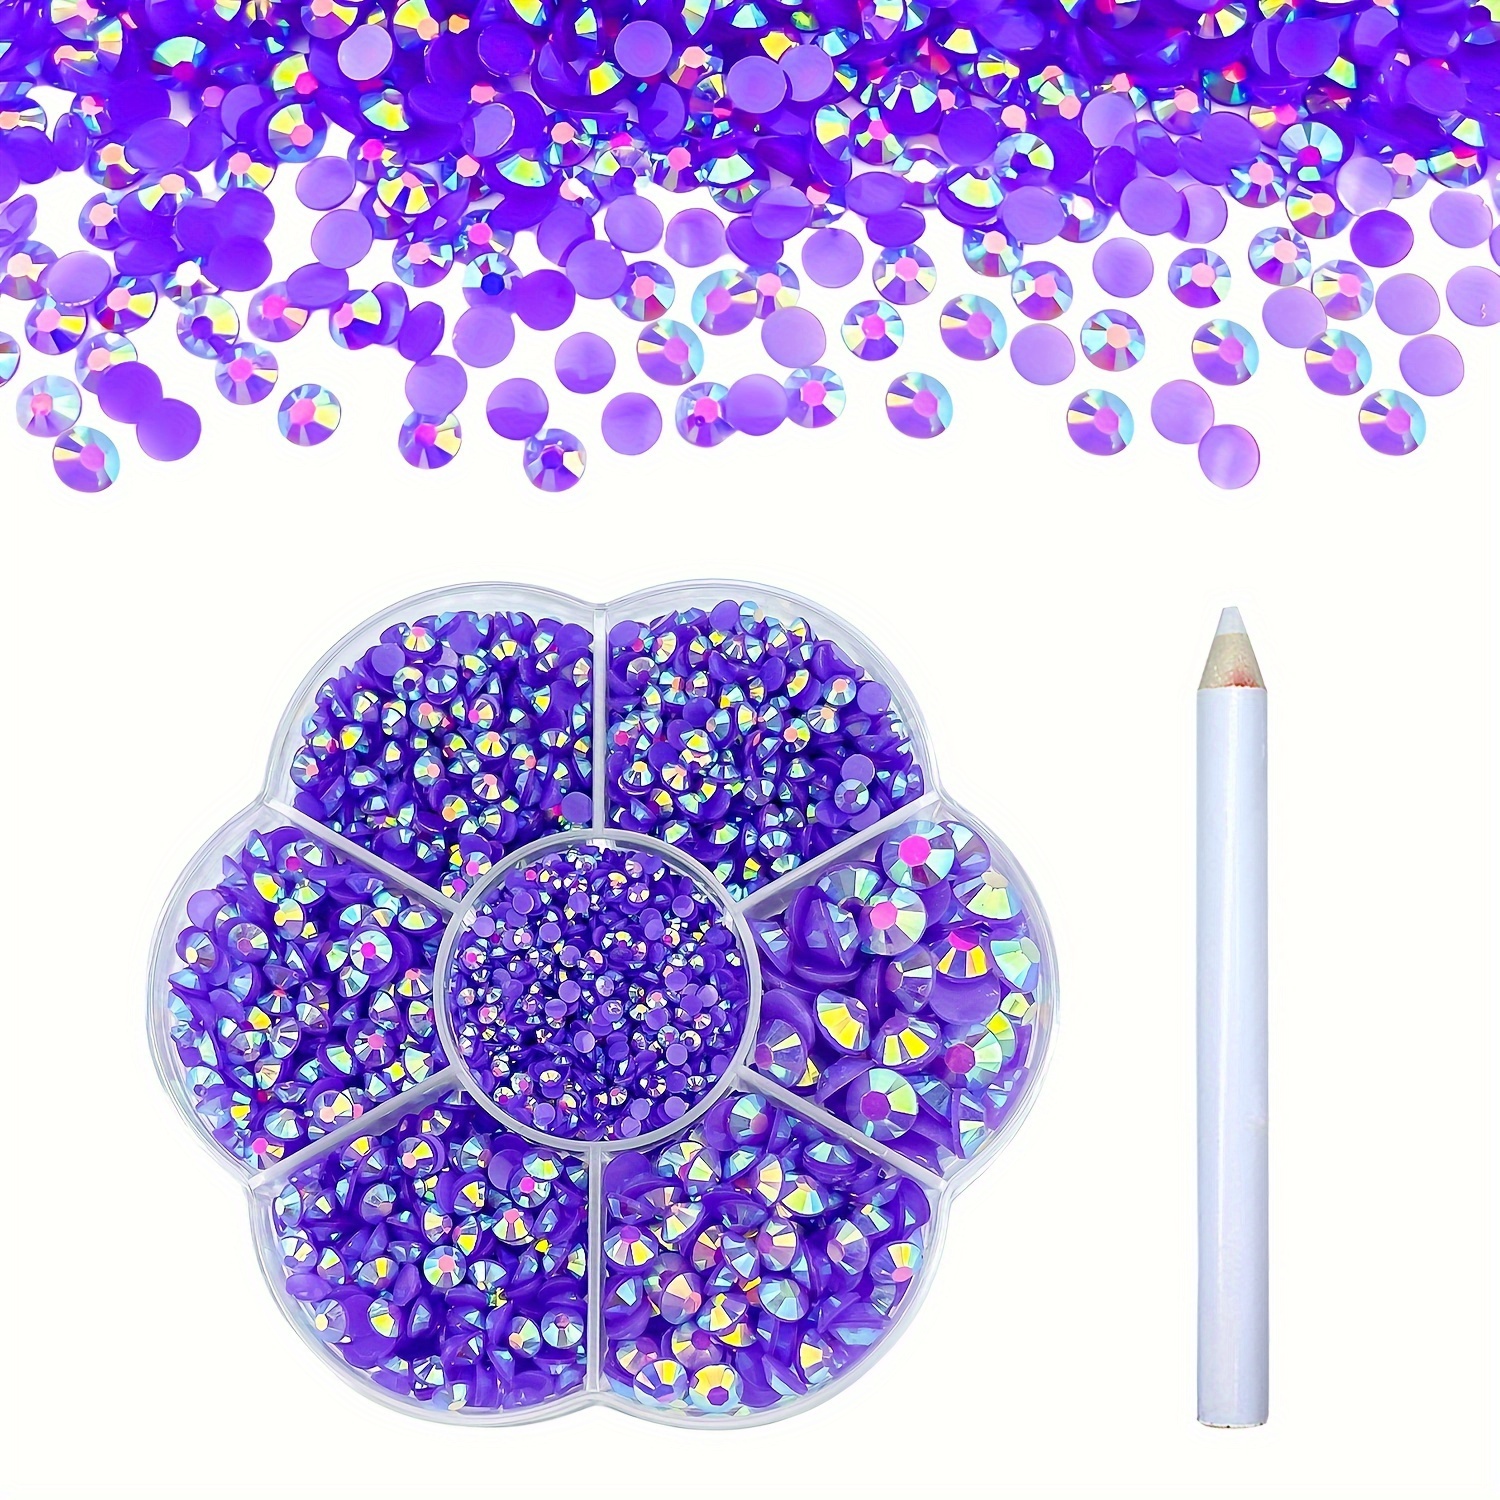 11000Pcs Purple Rhinestones Flatback with b7000 Glue for Crafts Clothes  Clothing Crafting, Dark Purple Flat Back Gems for Shirt Shoes Sneakers,  Violet